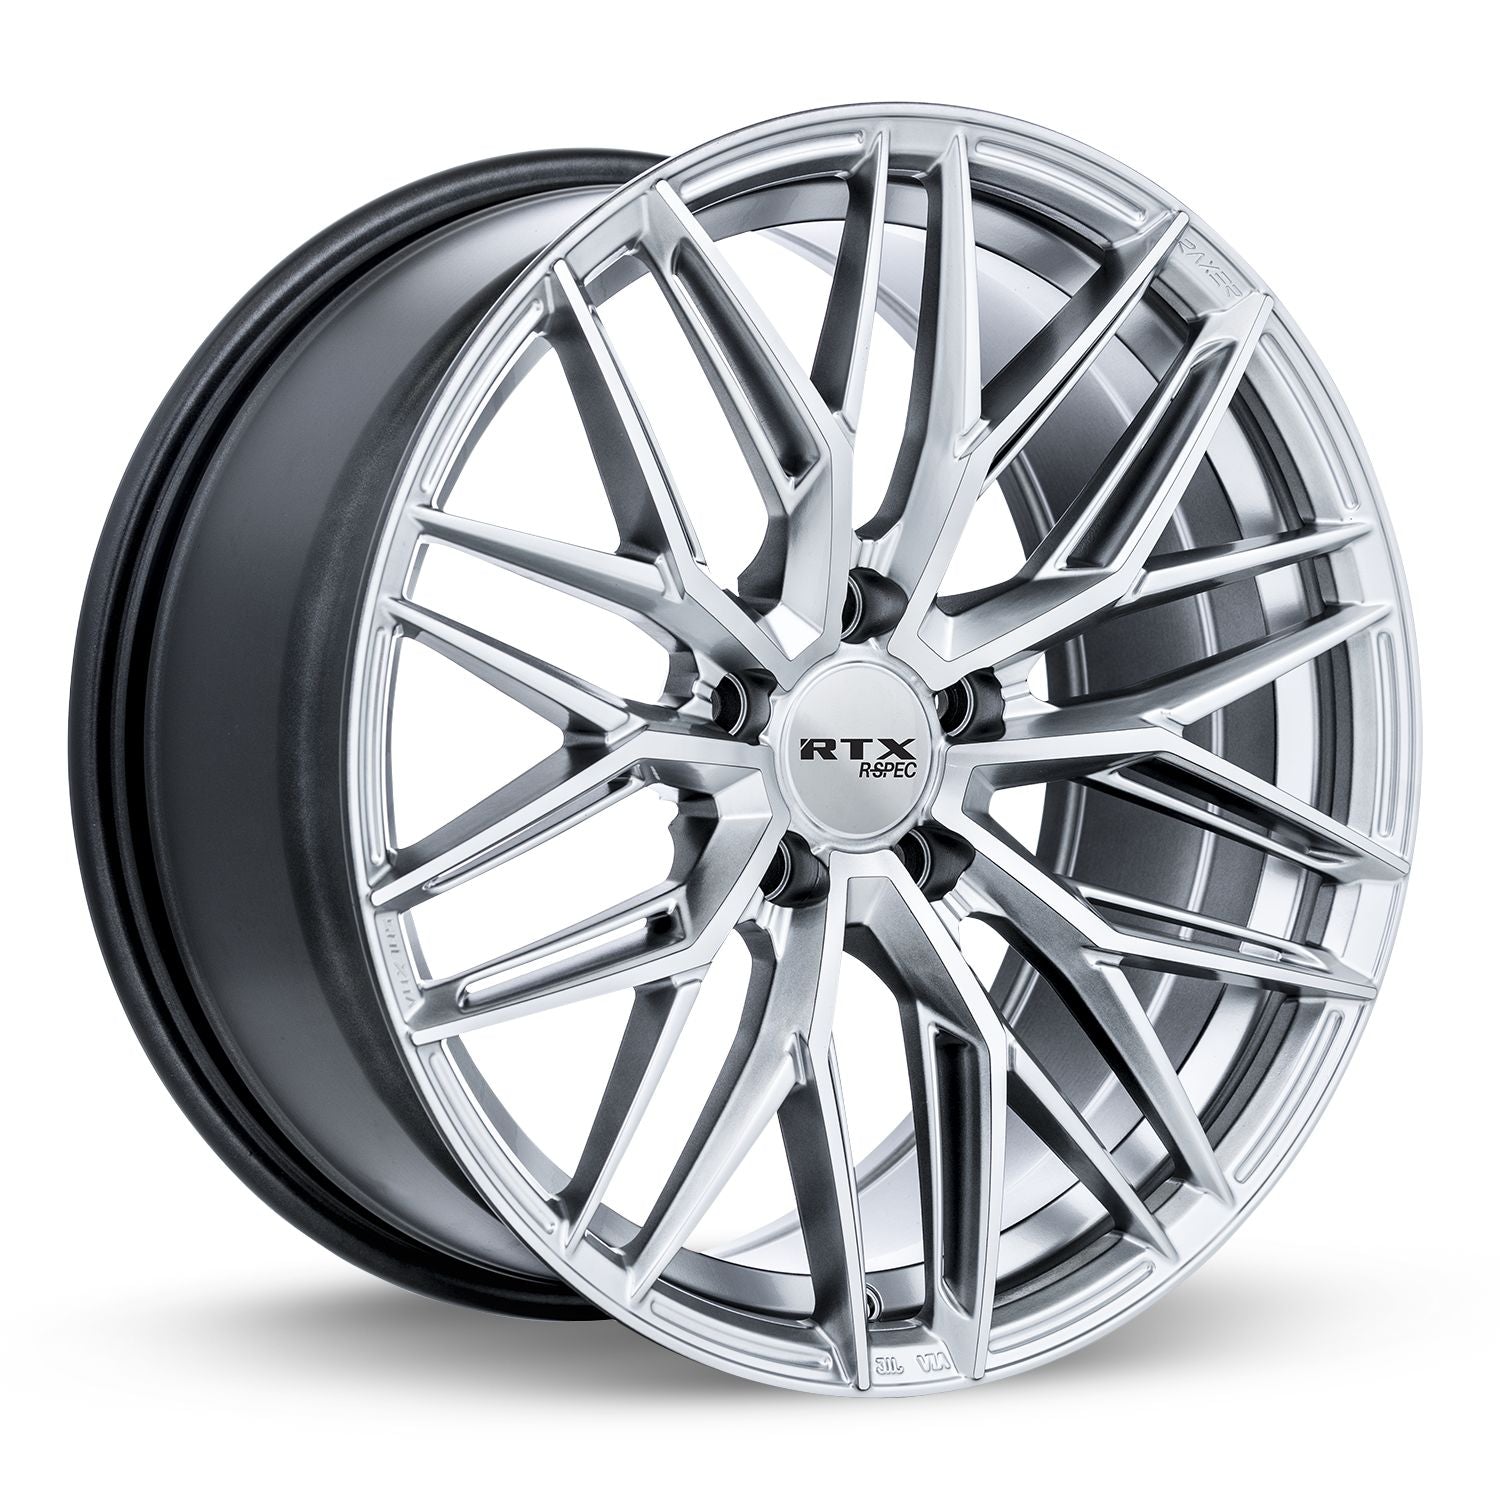 SW20 • Silver with Machined Face • 18x8.5 5x114.3 ET45 CB73.1